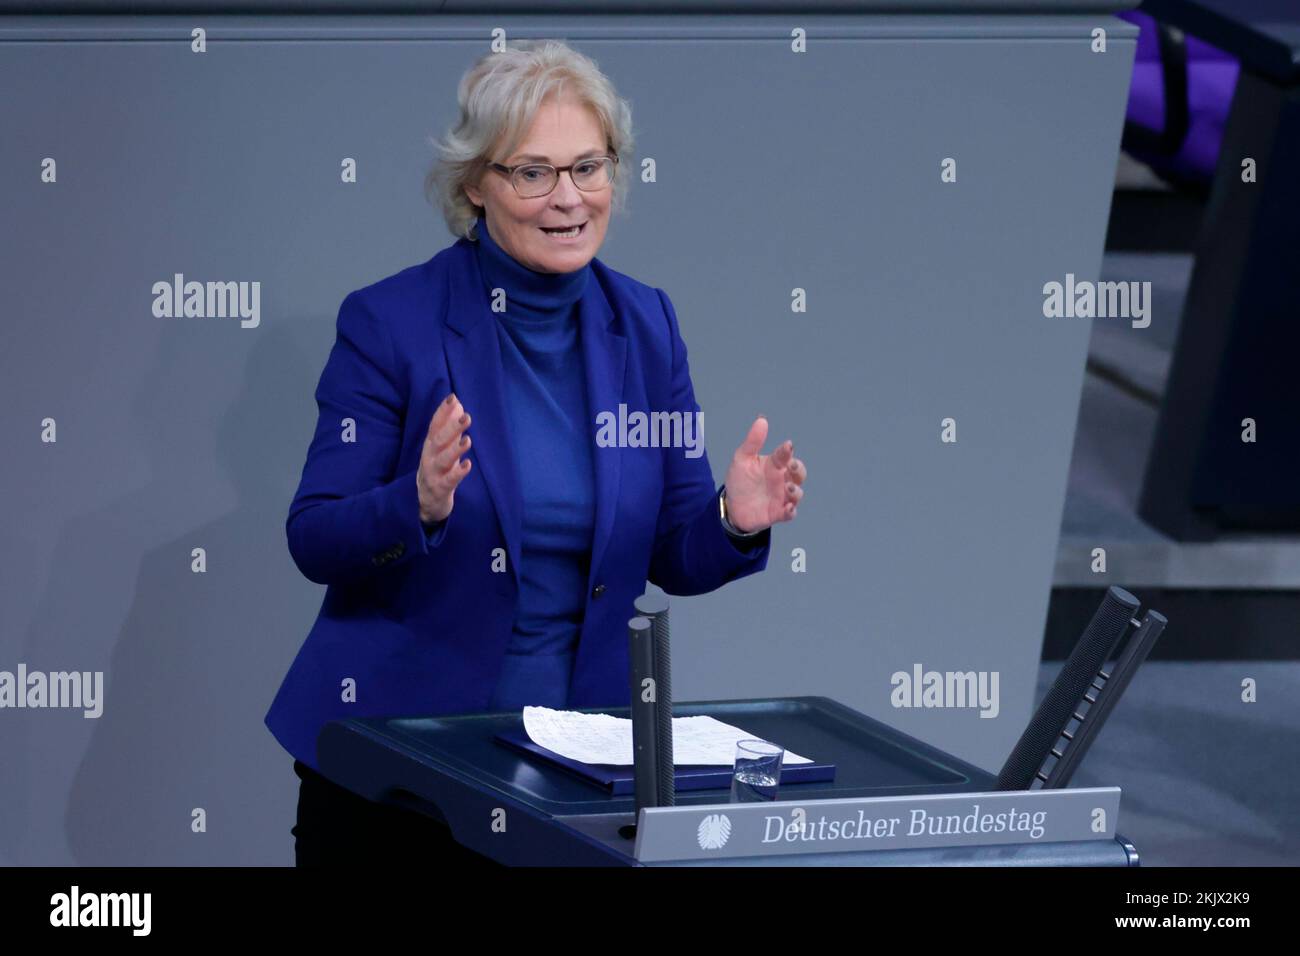 Christine Lambrecht speaks in the plenary session of the German Bundestag. Stock Photo